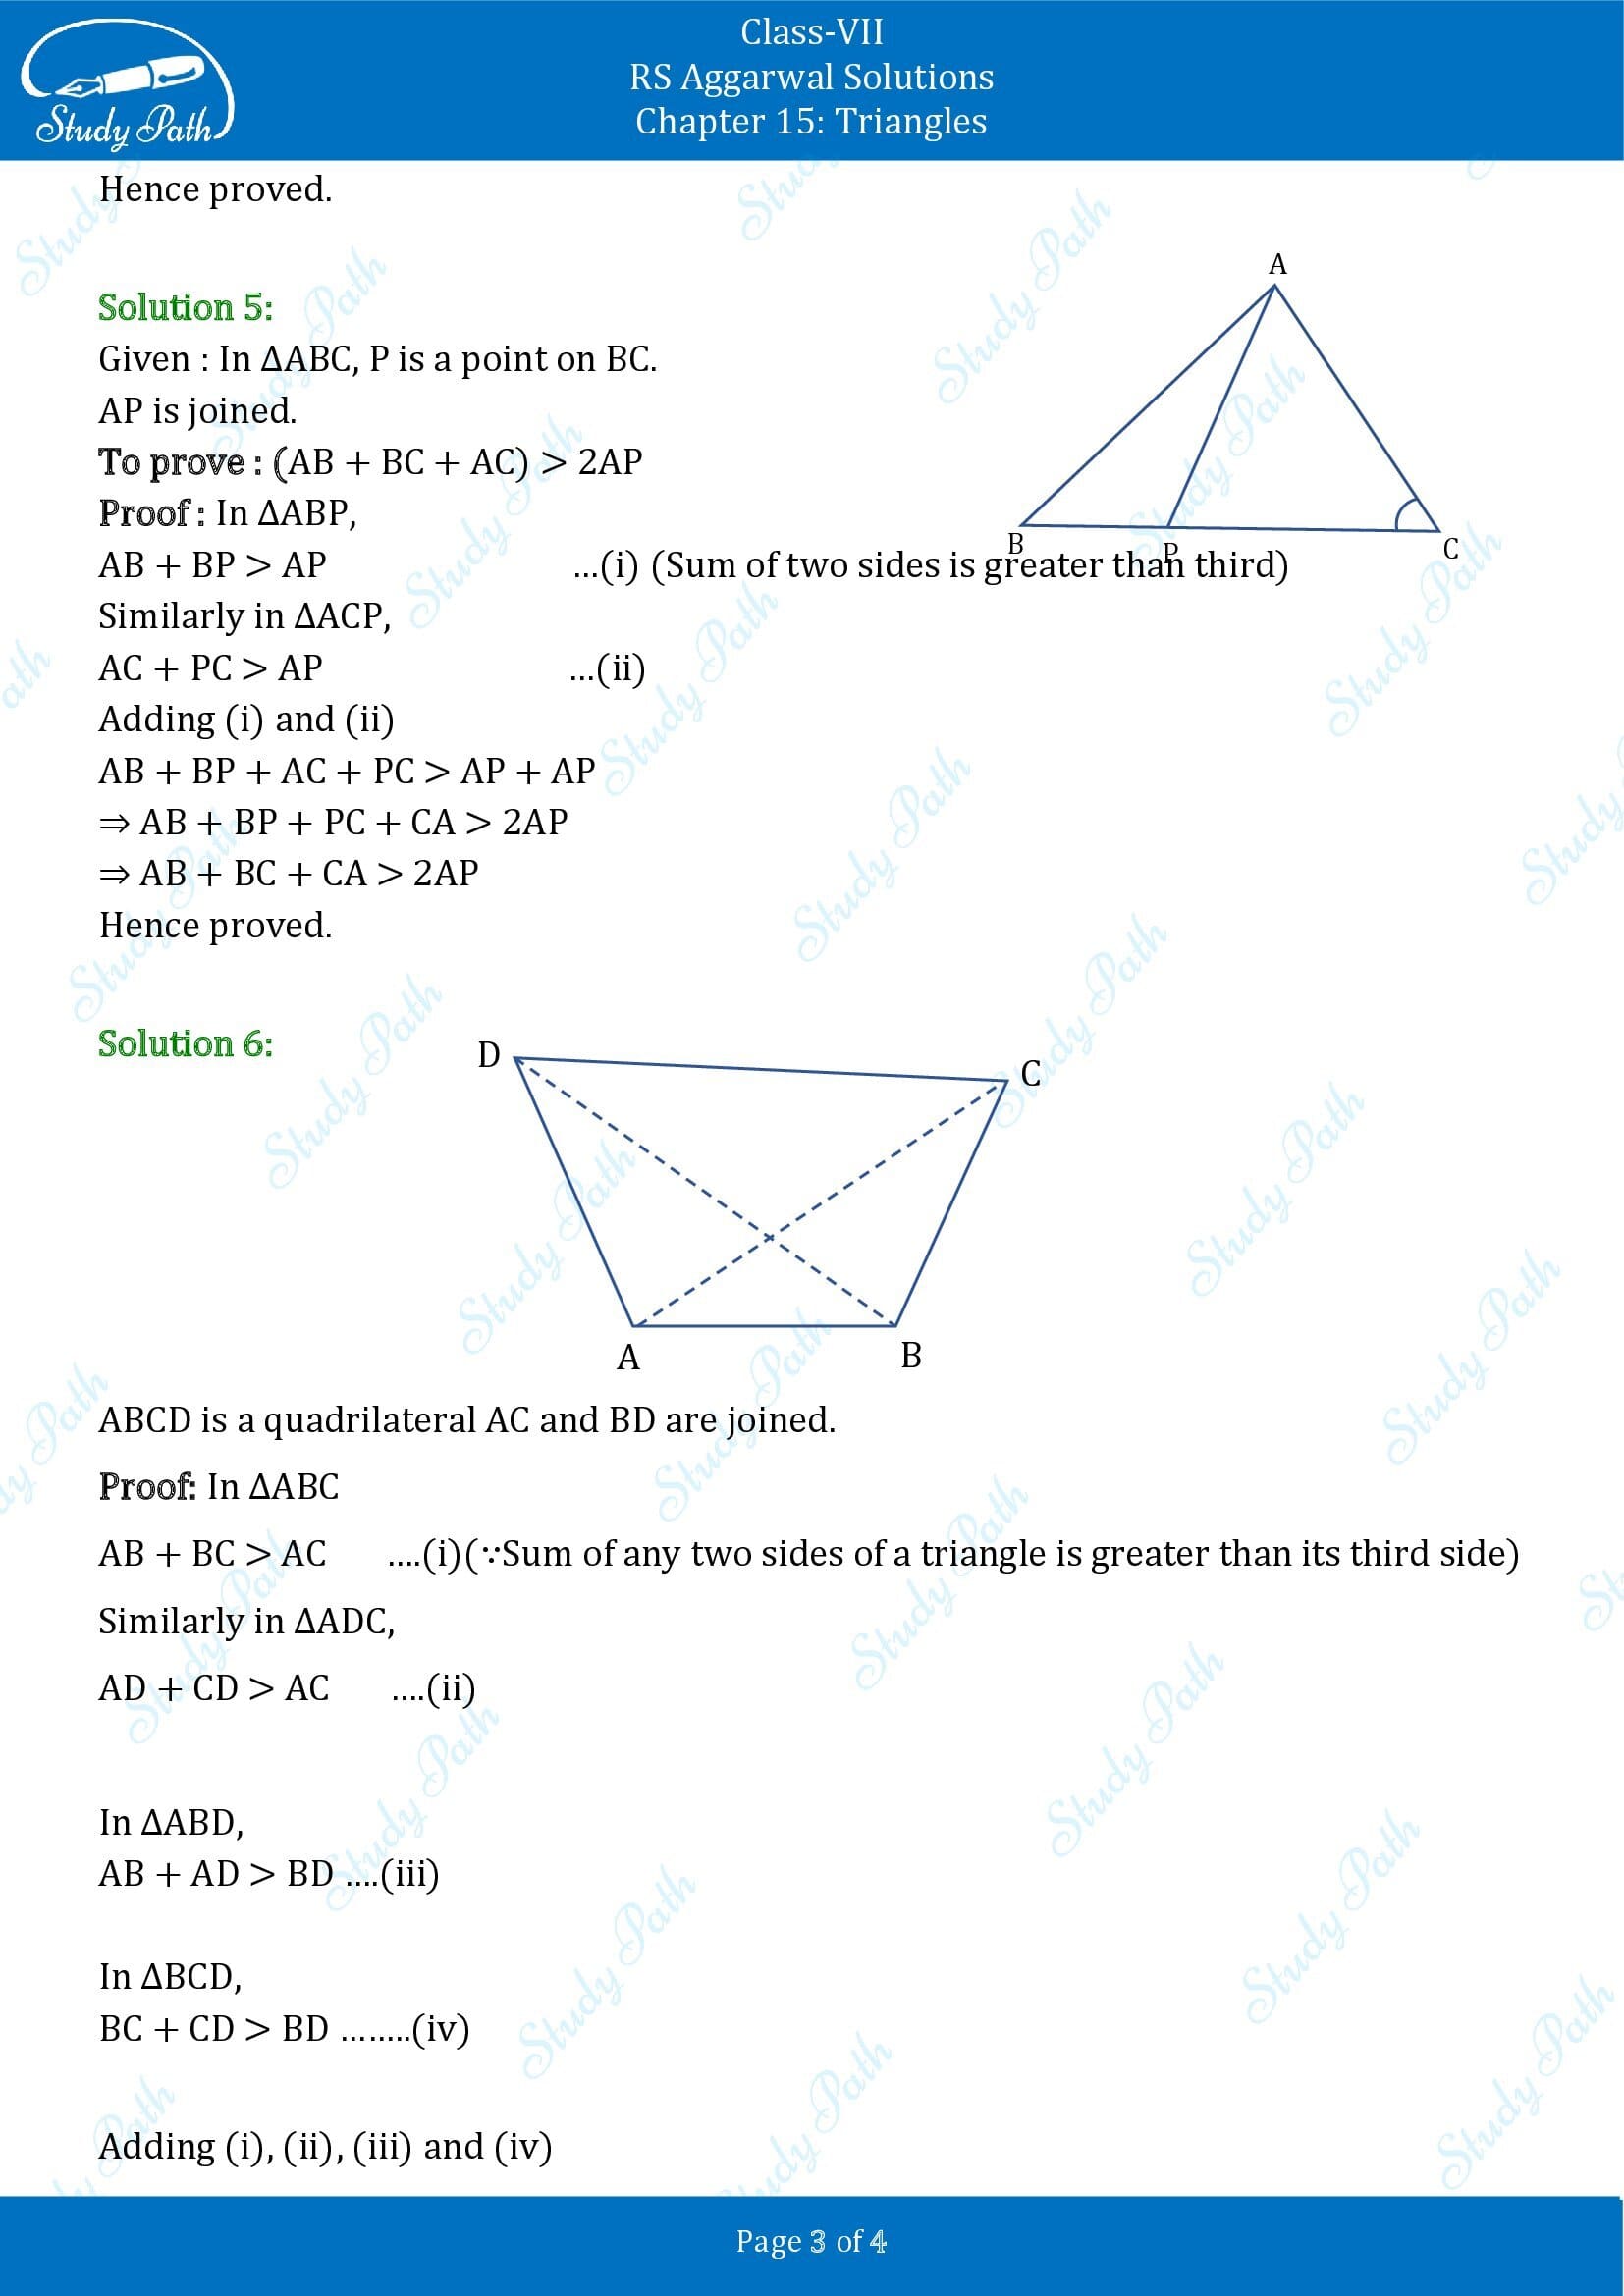 RS Aggarwal Solutions Class 7 Chapter 15 Triangles Exercise 15C 00003